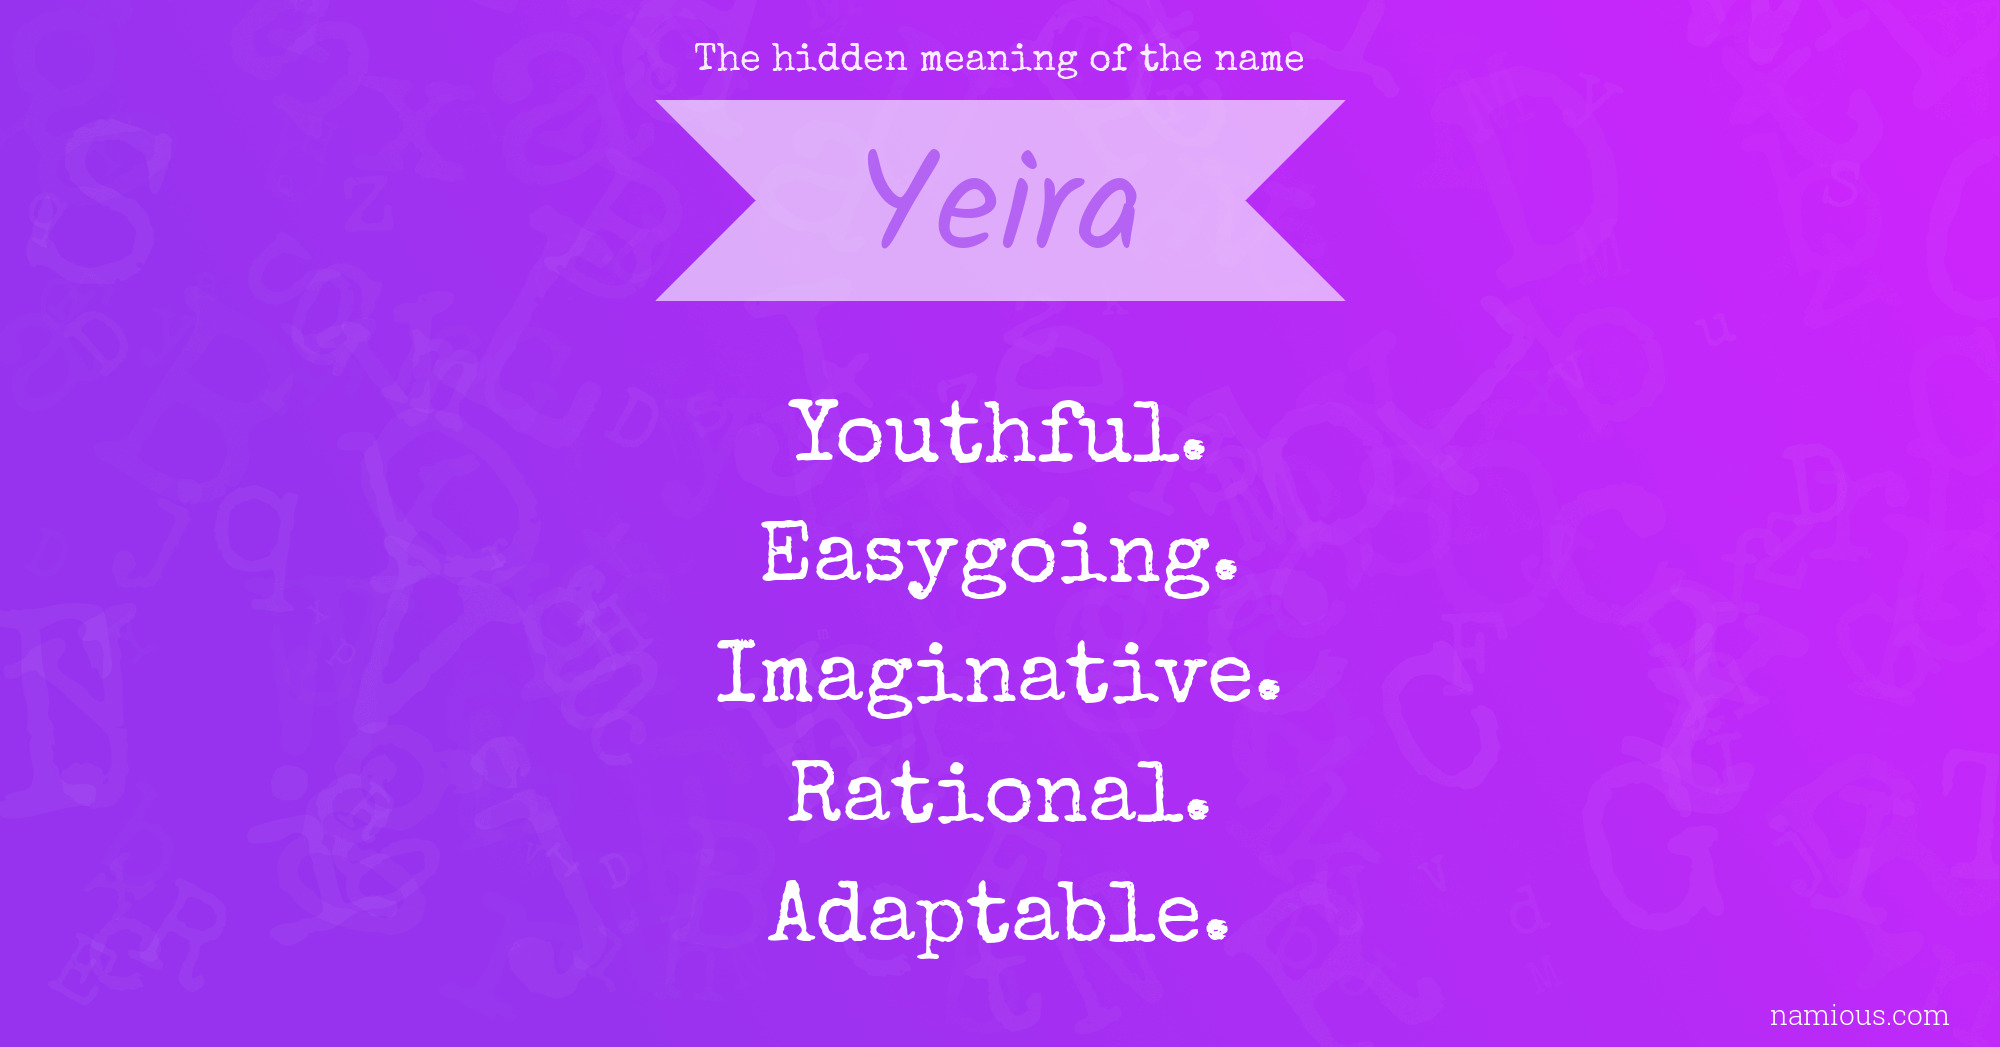 The hidden meaning of the name Yeira